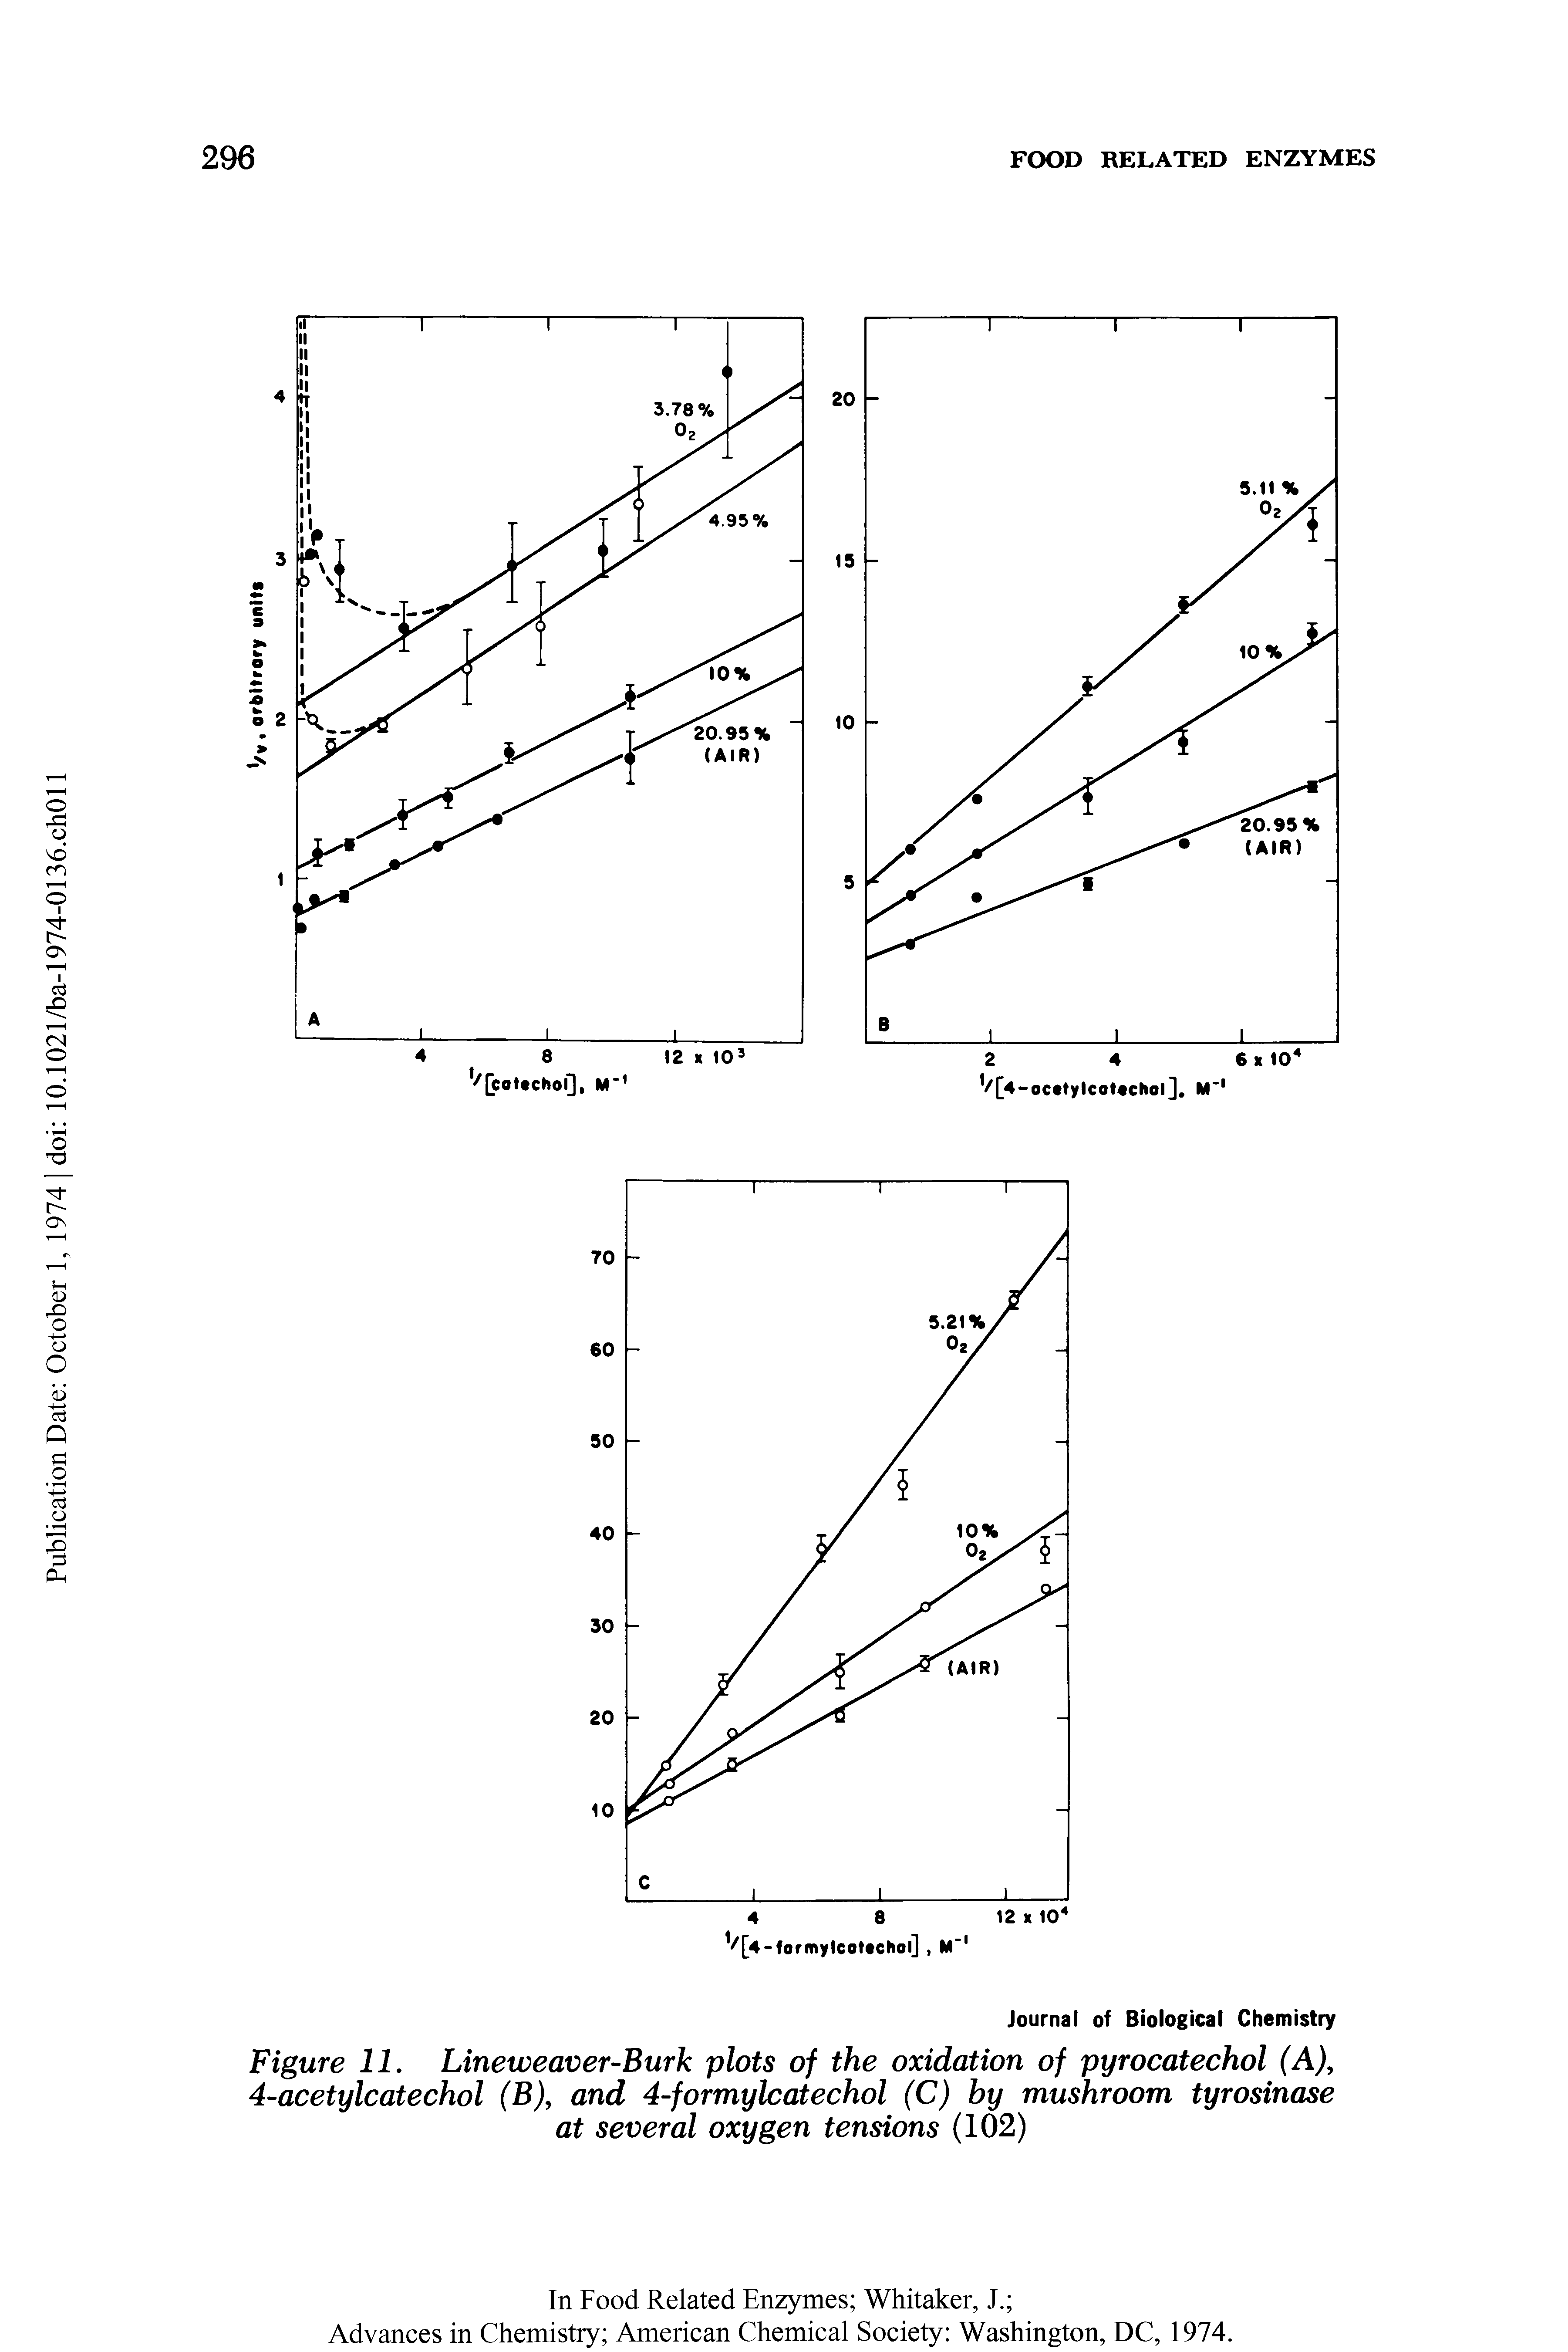 Figure 11. Lineweaver-Burk plots of the oxidation of pyrocatechol (A), 4-acetylcatechol (B), and 4-formylcatechol (C) by mushroom tyrosinase at several oxygen tensions (102)...